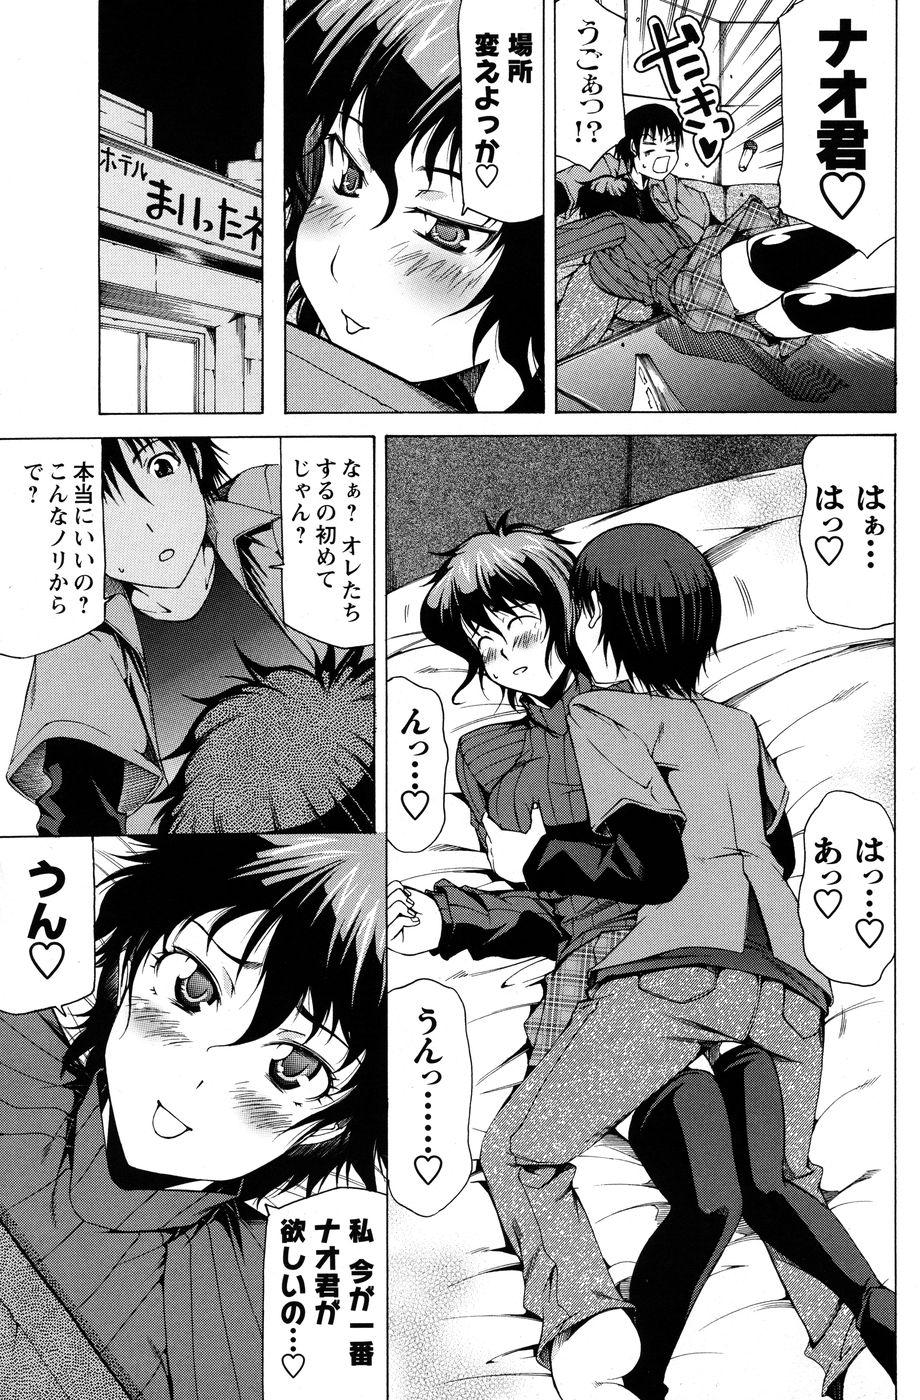 Men's Young Special Ikazuchi 2010-06 Vol. 14 117